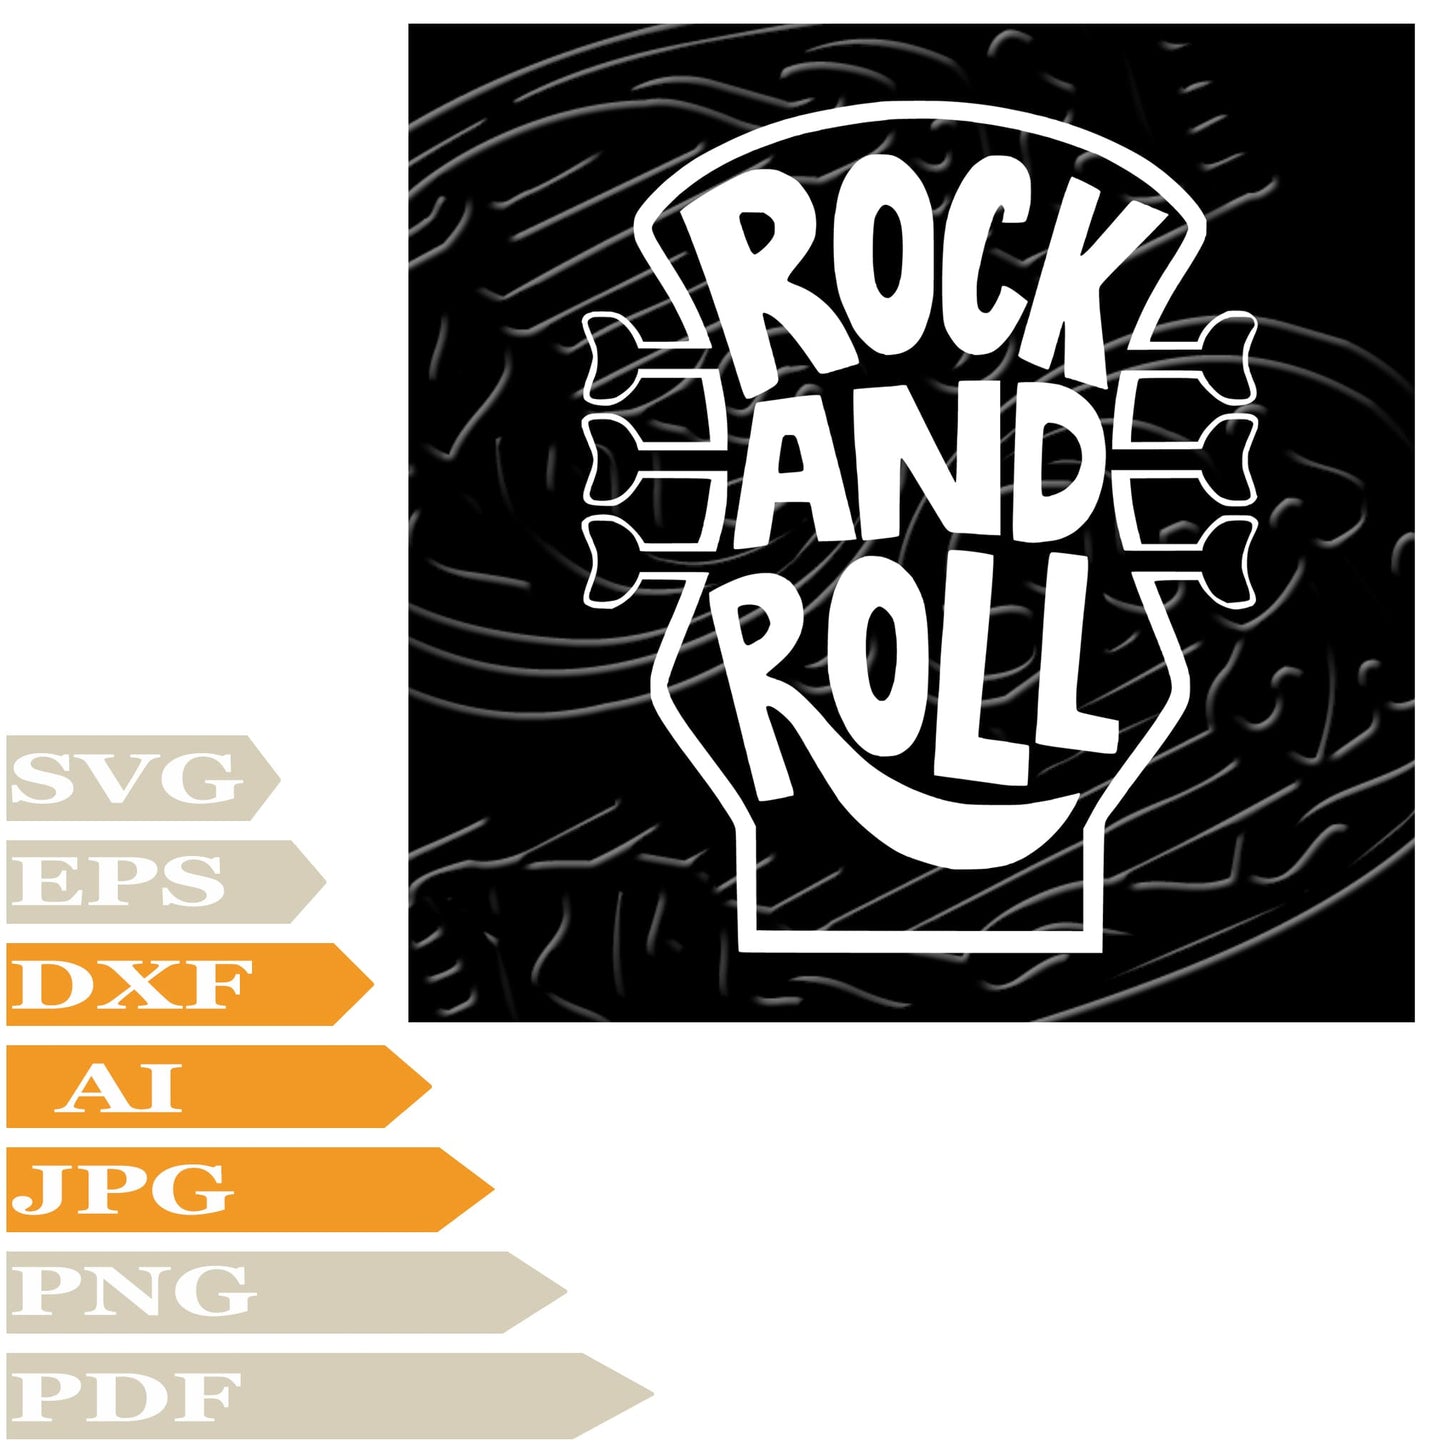 Headstock, Headstock Rock And RoLL Svg File, Image Cut, Png, For Tattoo, Silhouette, Digital Vector Download, Cut File, Clipart, For Cricut